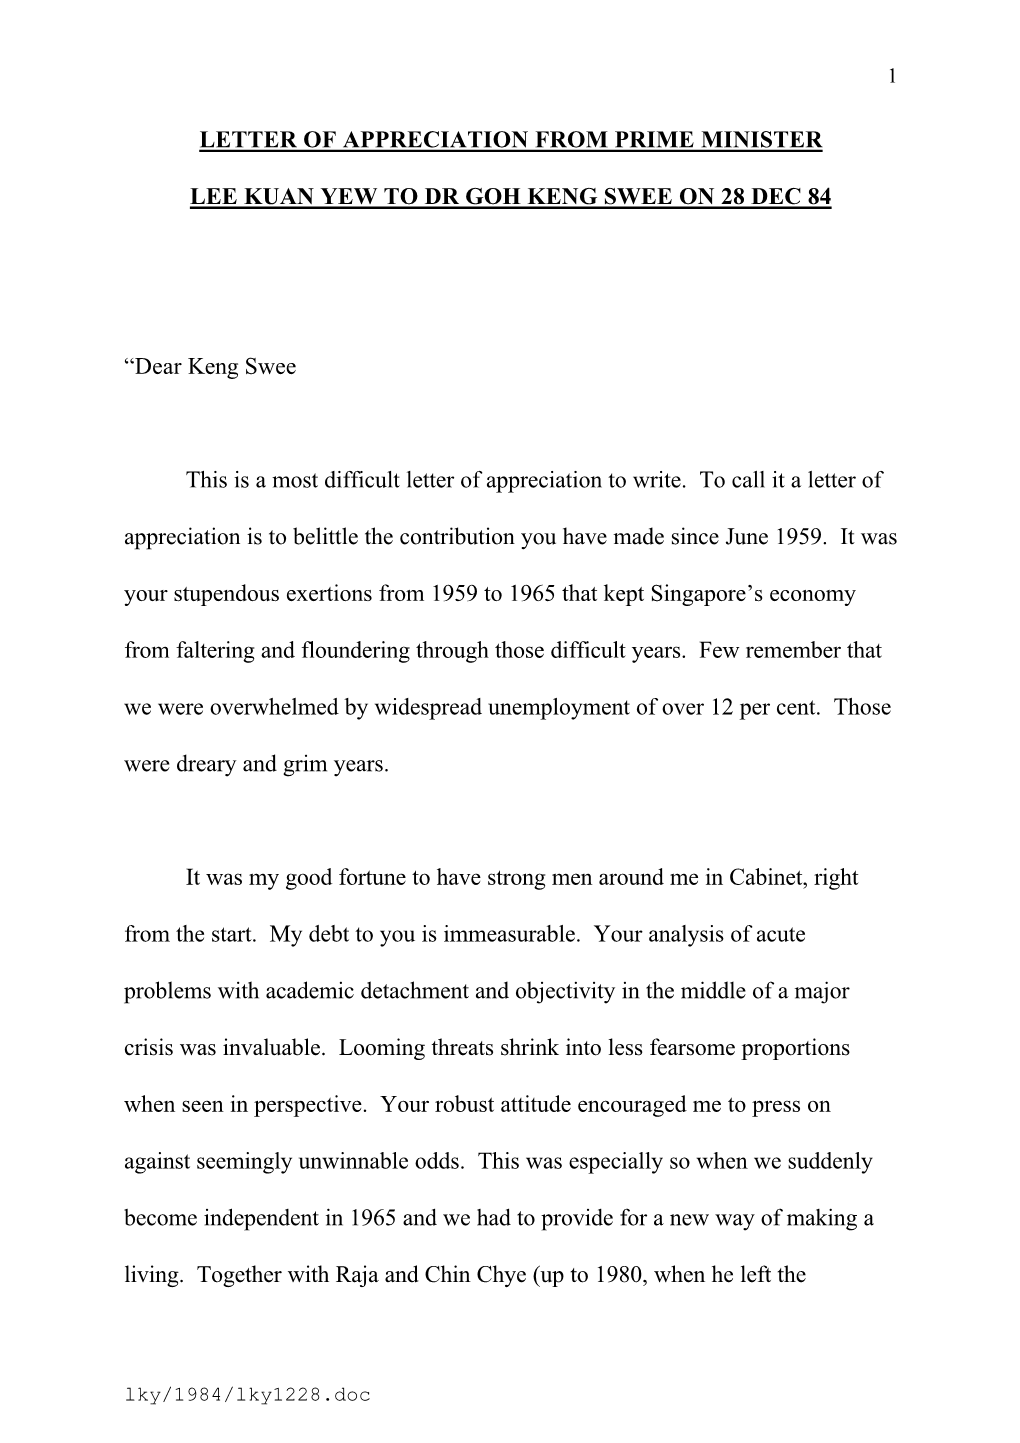 Letter of Appreciation from Prime Minister Lee Kuan Yew to Dr Goh